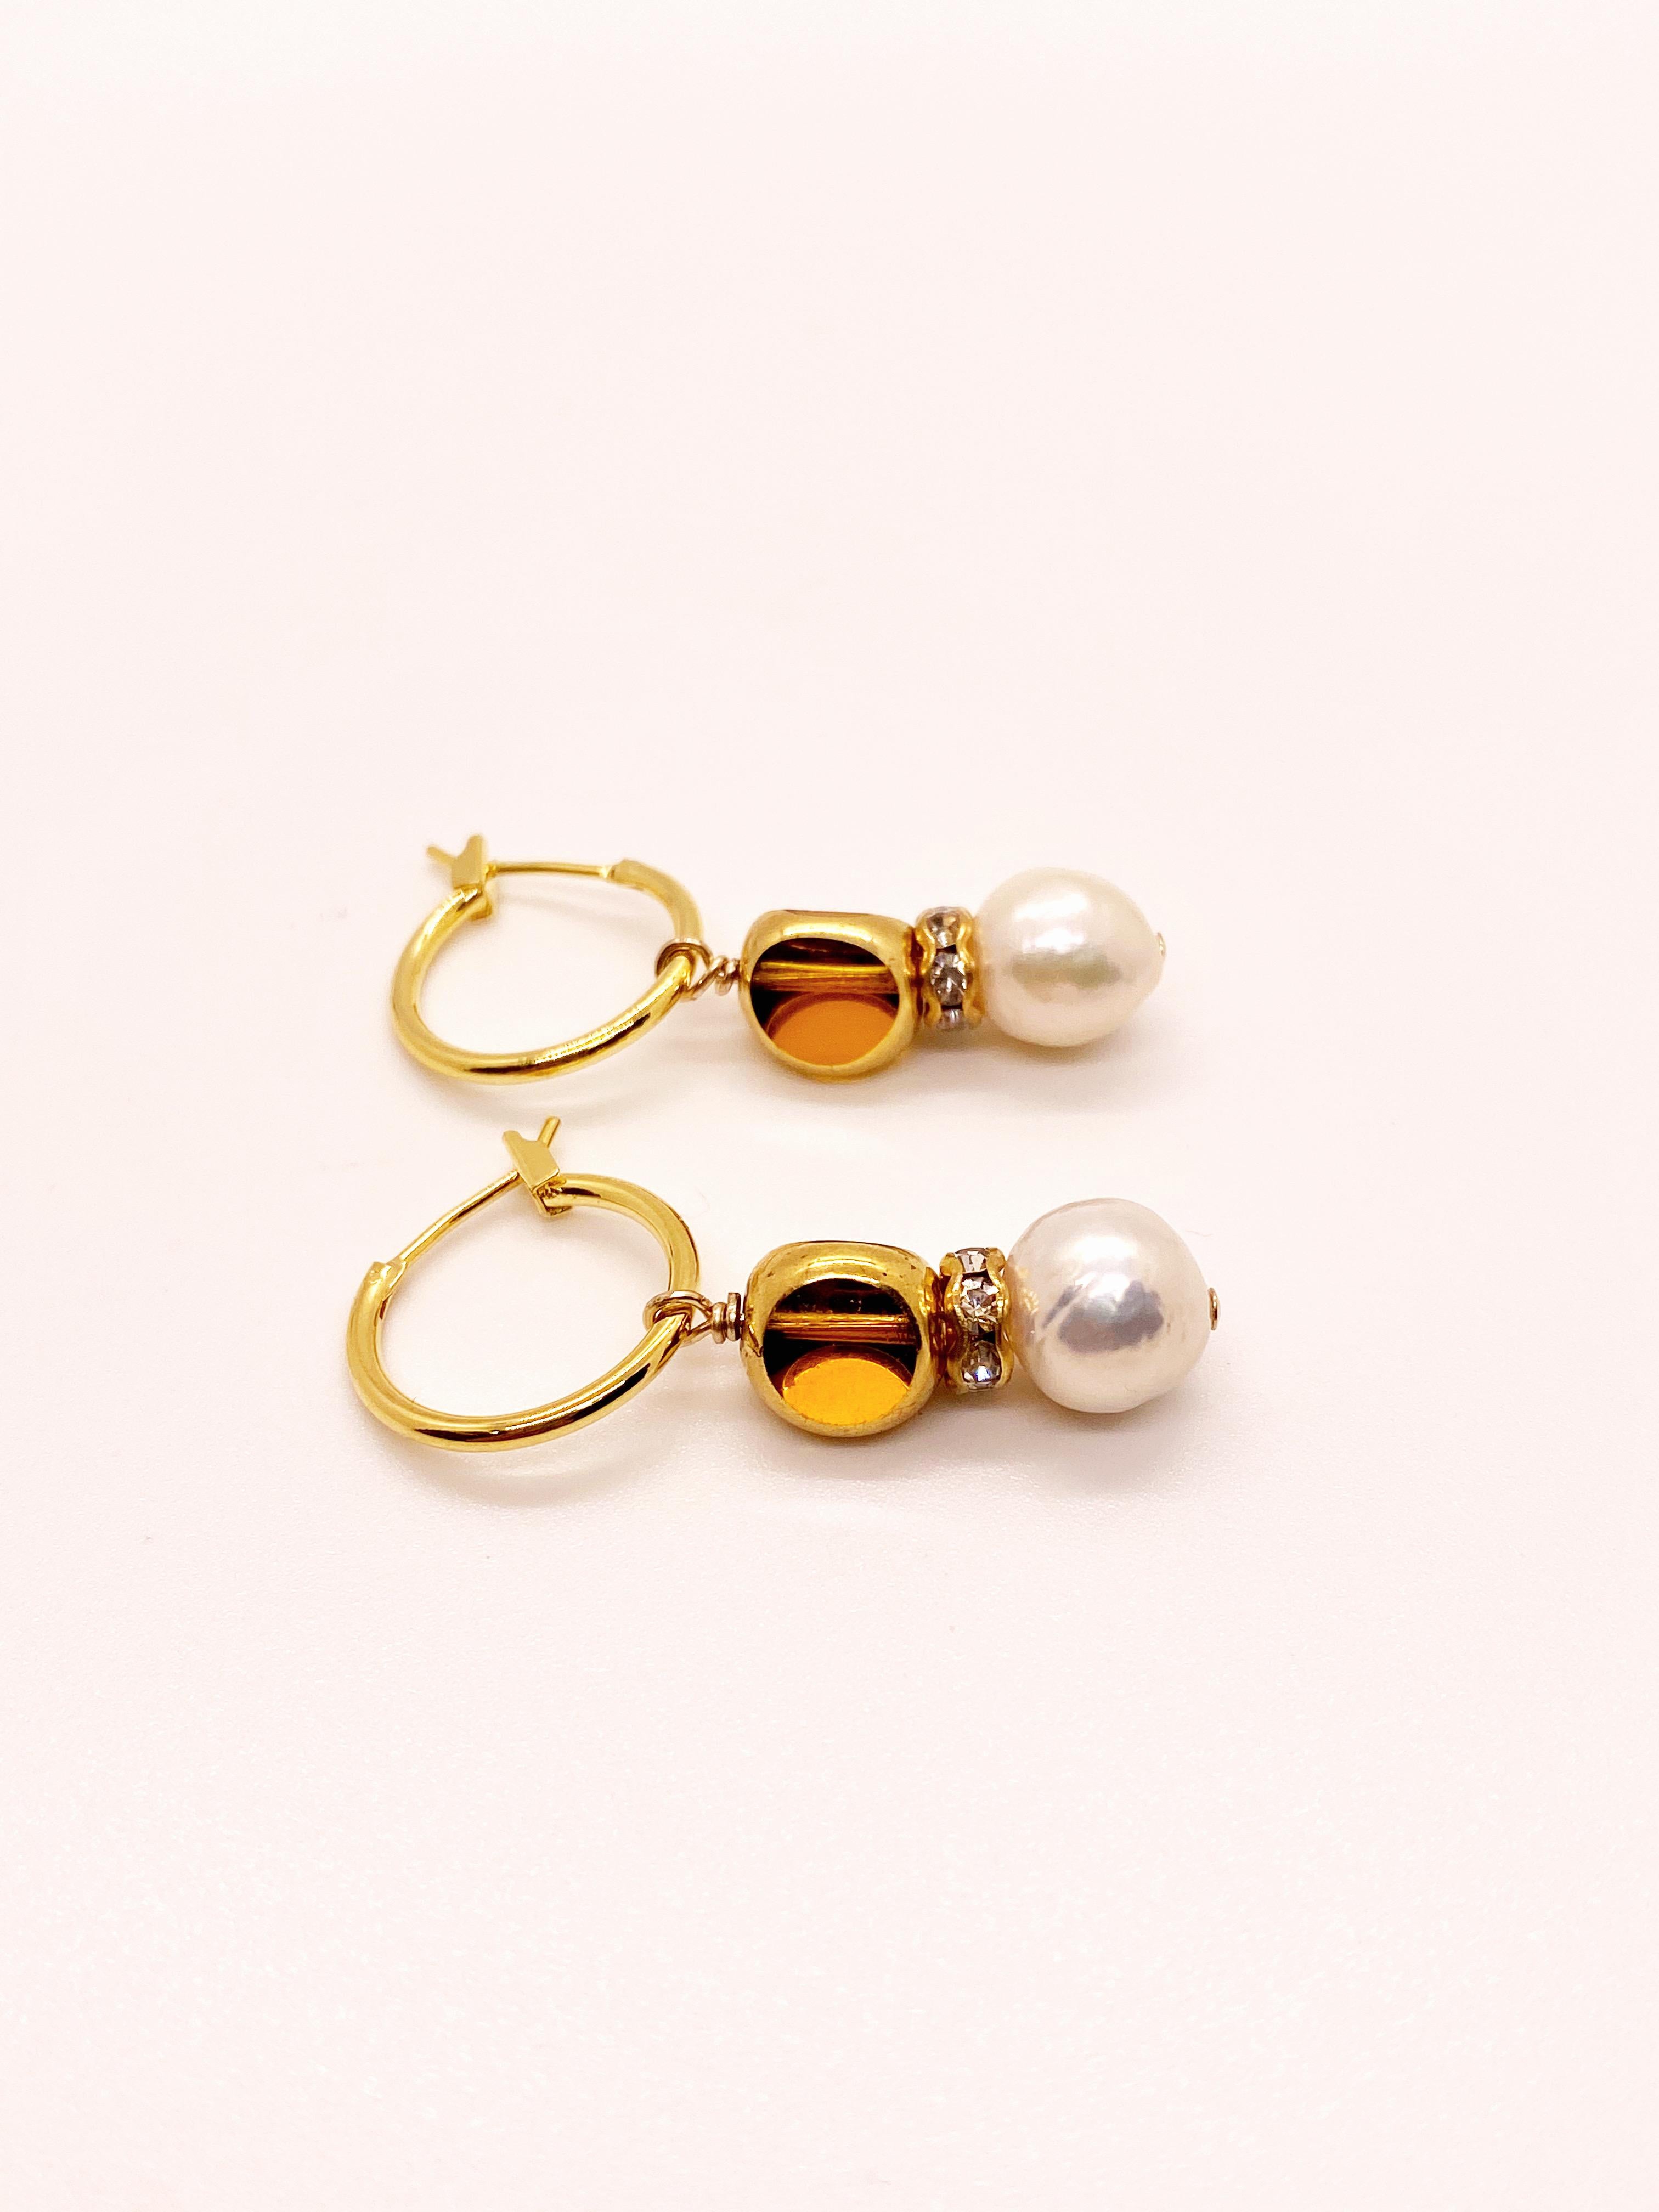 Contemporary Vintage German Window Glass Beads edged with 24K gold and Pearl Earrings